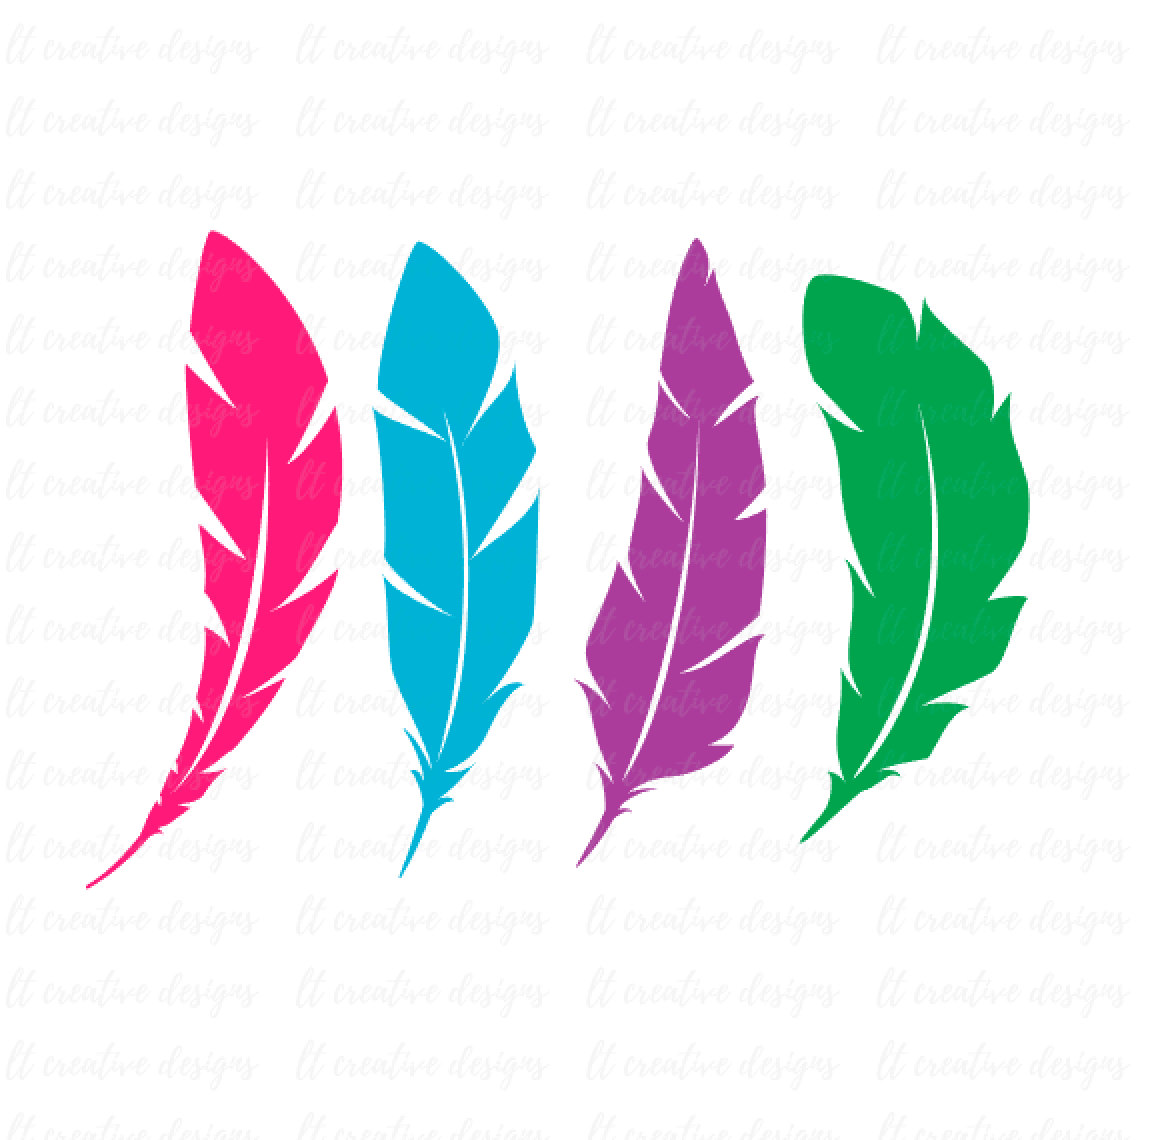 Feather Clip Art, Feather SVG, Feathers SVG, Feather PNG, Feather Set Svg, Cricut Cut Files, Silhouette Svg